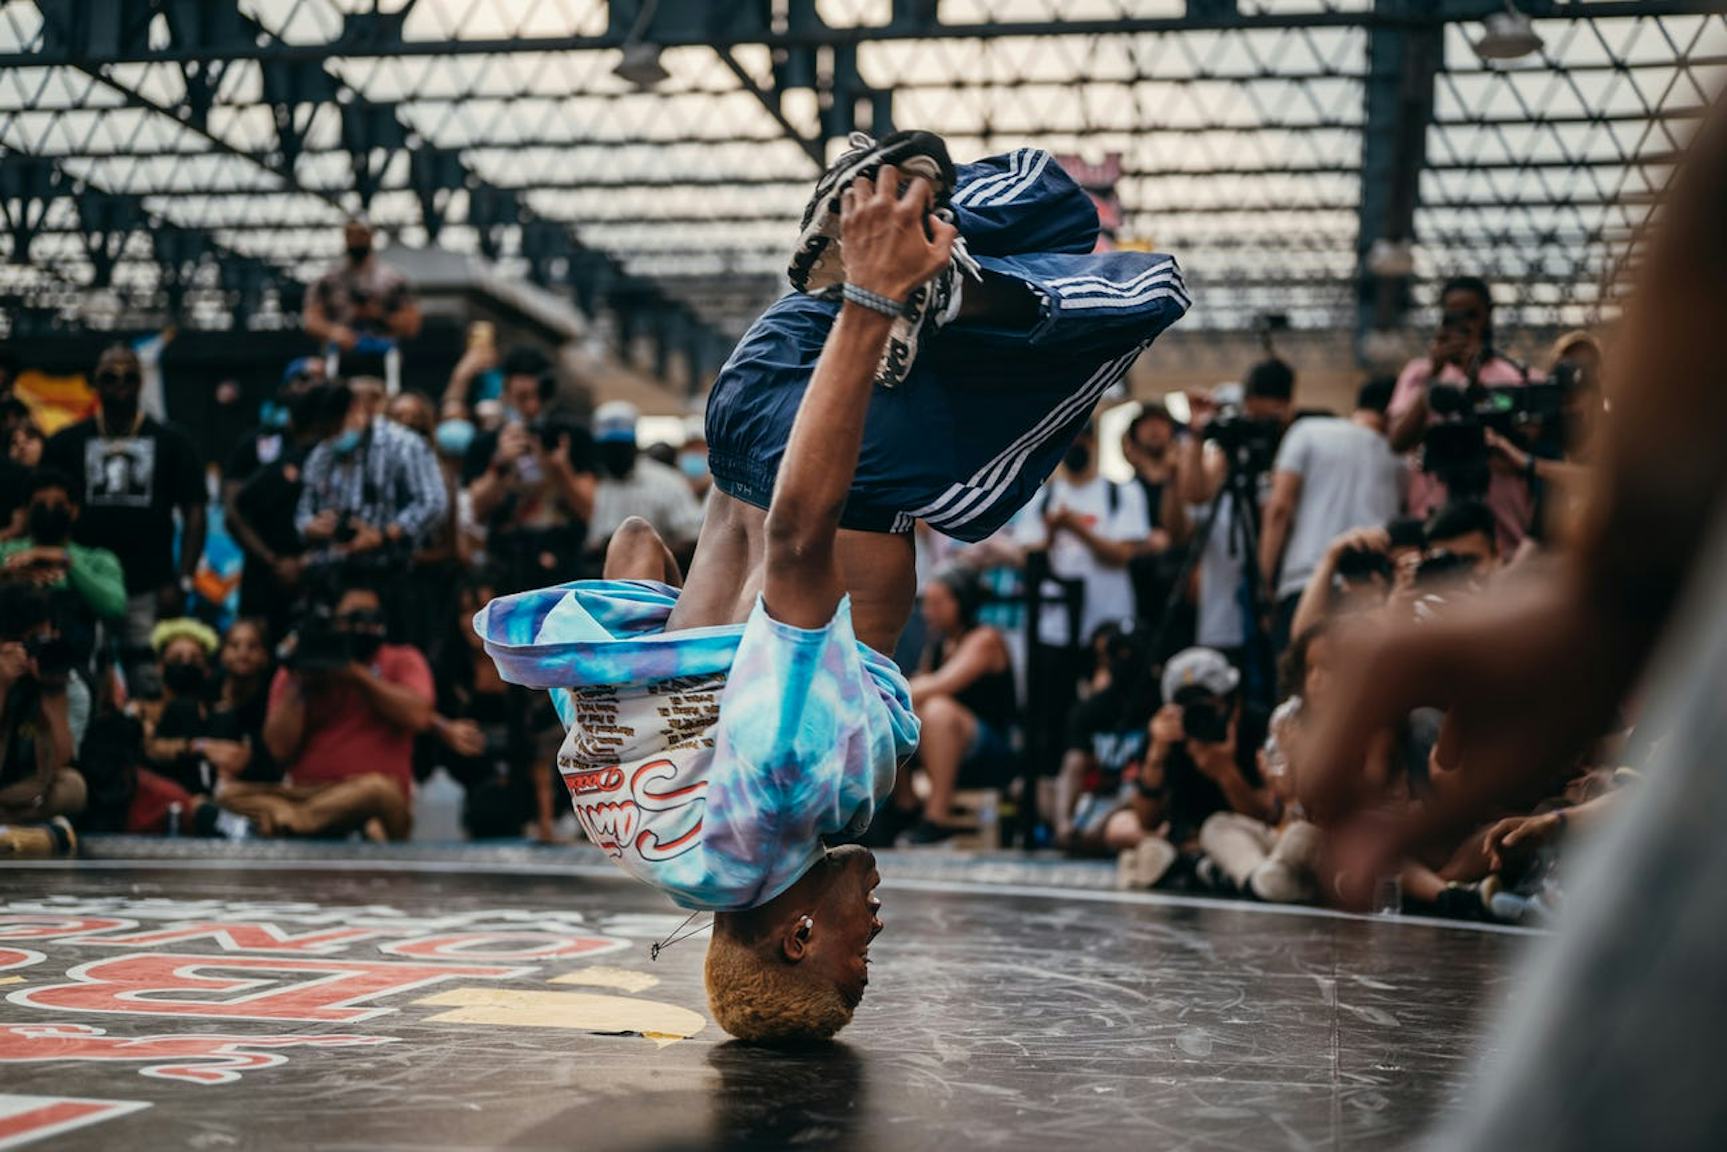 Worldclass breakdancers are gearing up to Olympic athletes in 2024